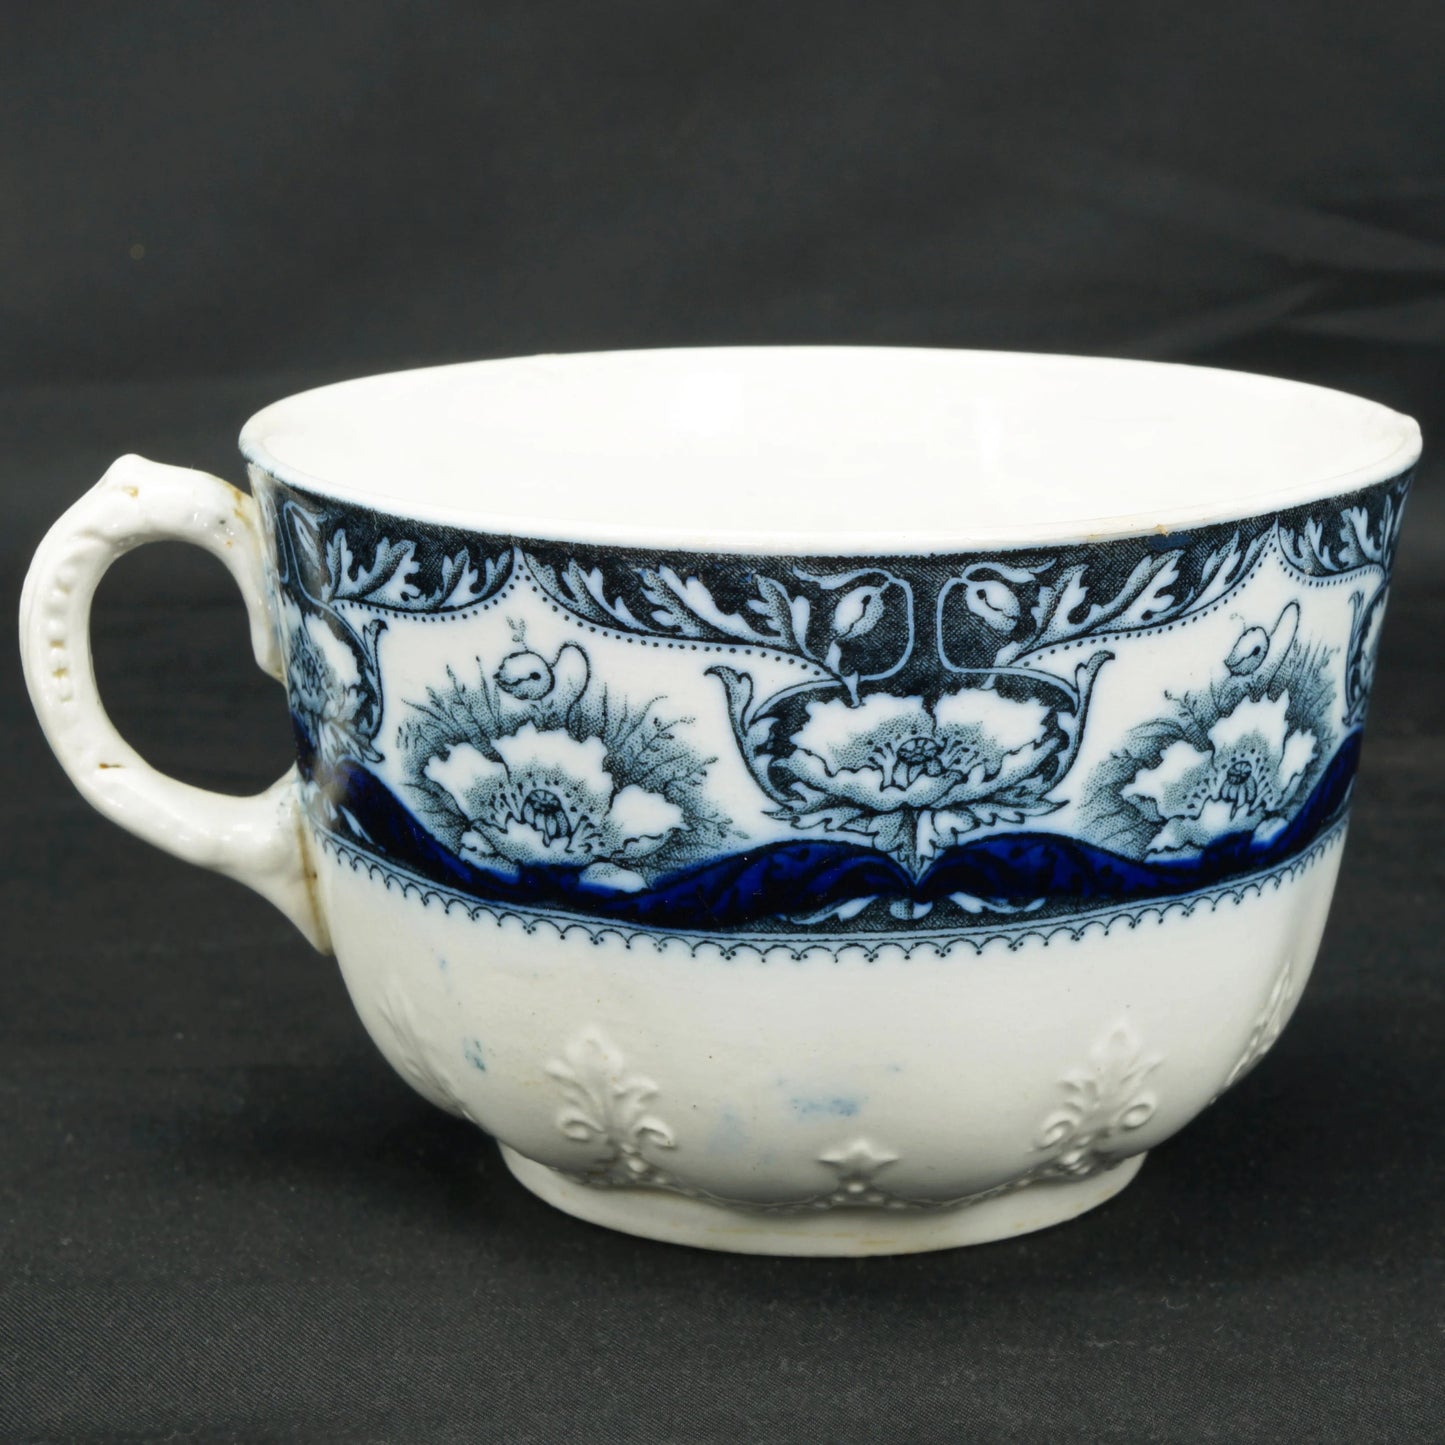 Large Antique Molded Staffordshire Transferware Teacup and Saucer - Bear and Raven Antiques